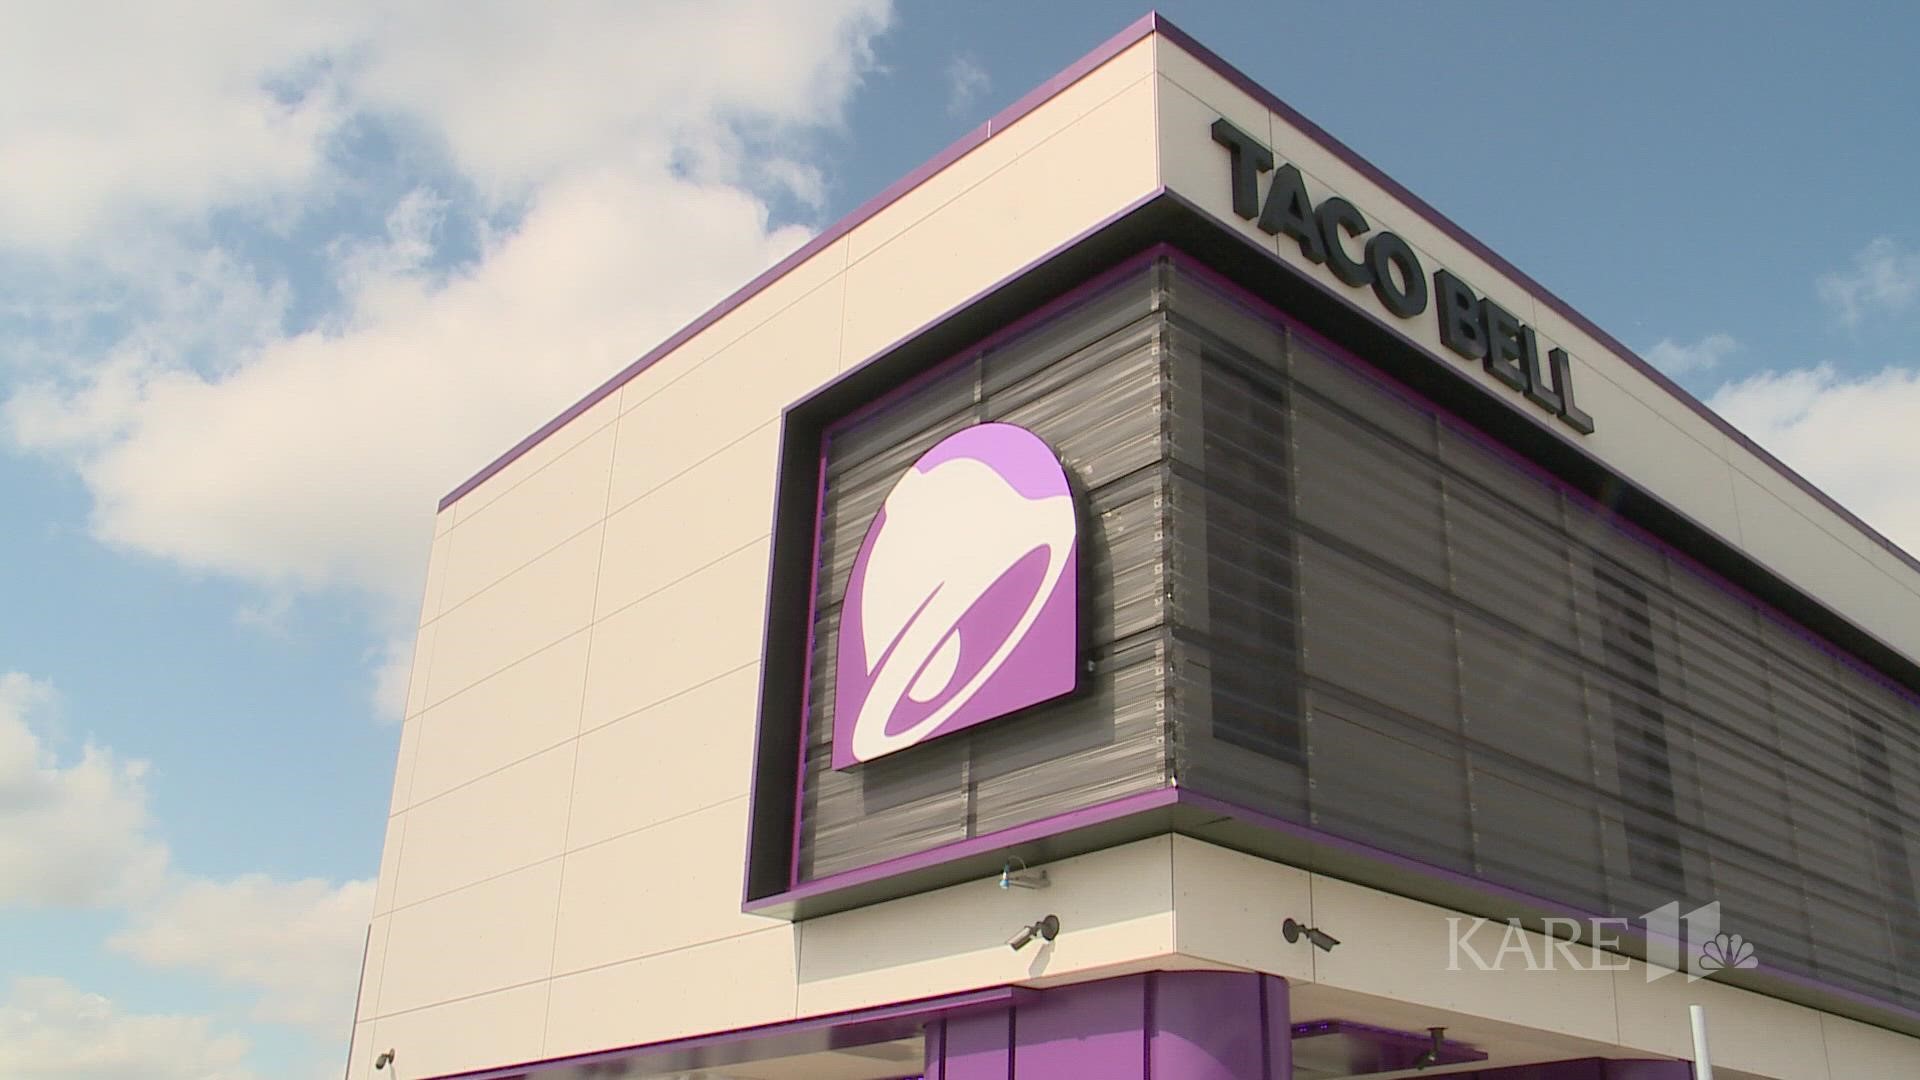 The first-of-its-kind Taco Bell location has multiple drive-thru lanes and uses a proprietary lift system to deliver food from the kitchen right to your car.